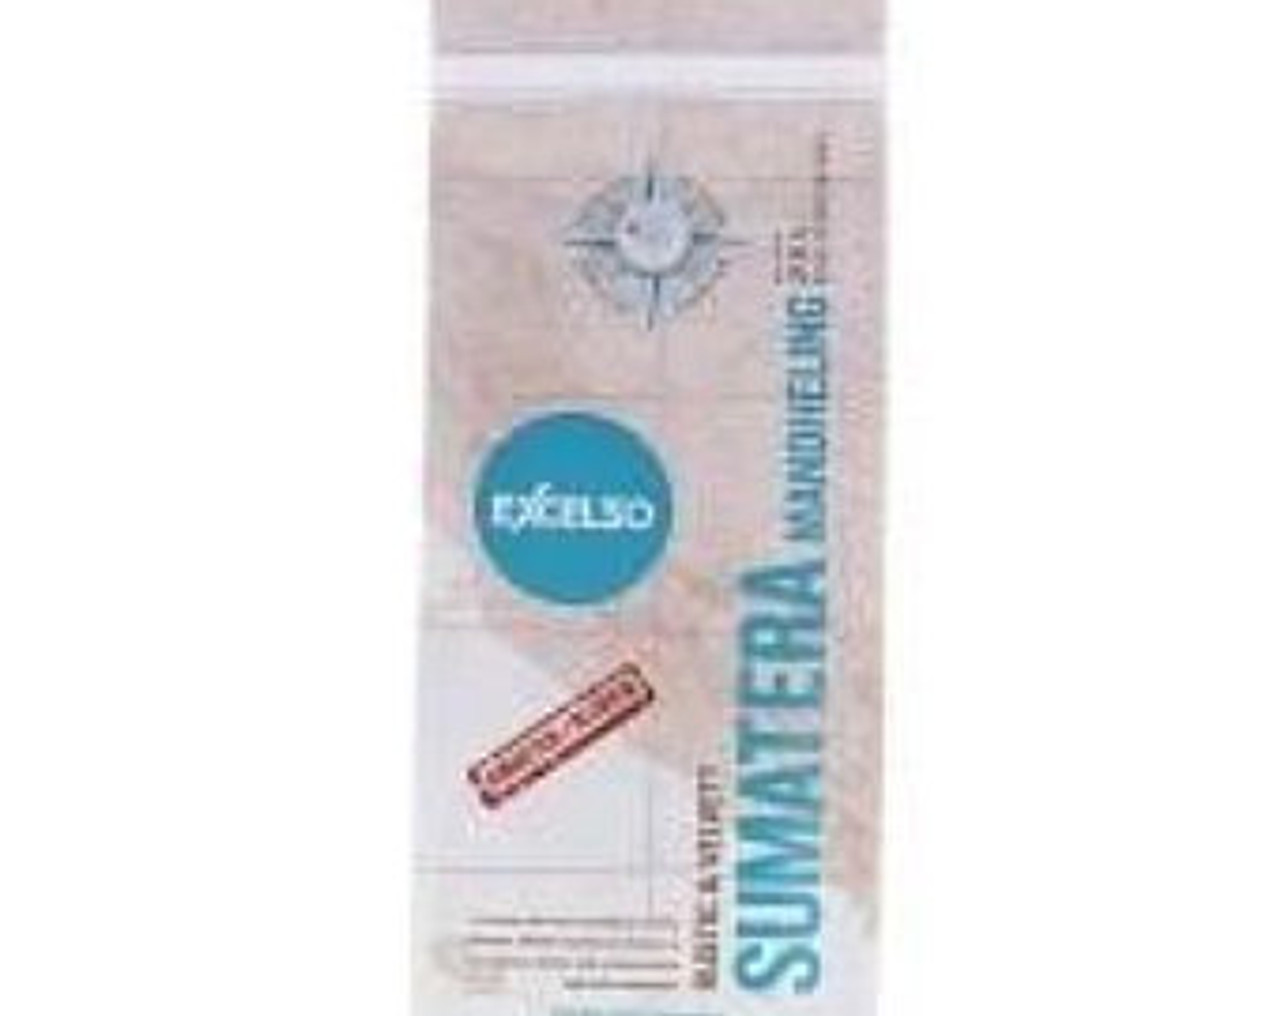 Excelso Sumatera Mandheling - Ground Coffee, 200 Gram (Pouch)